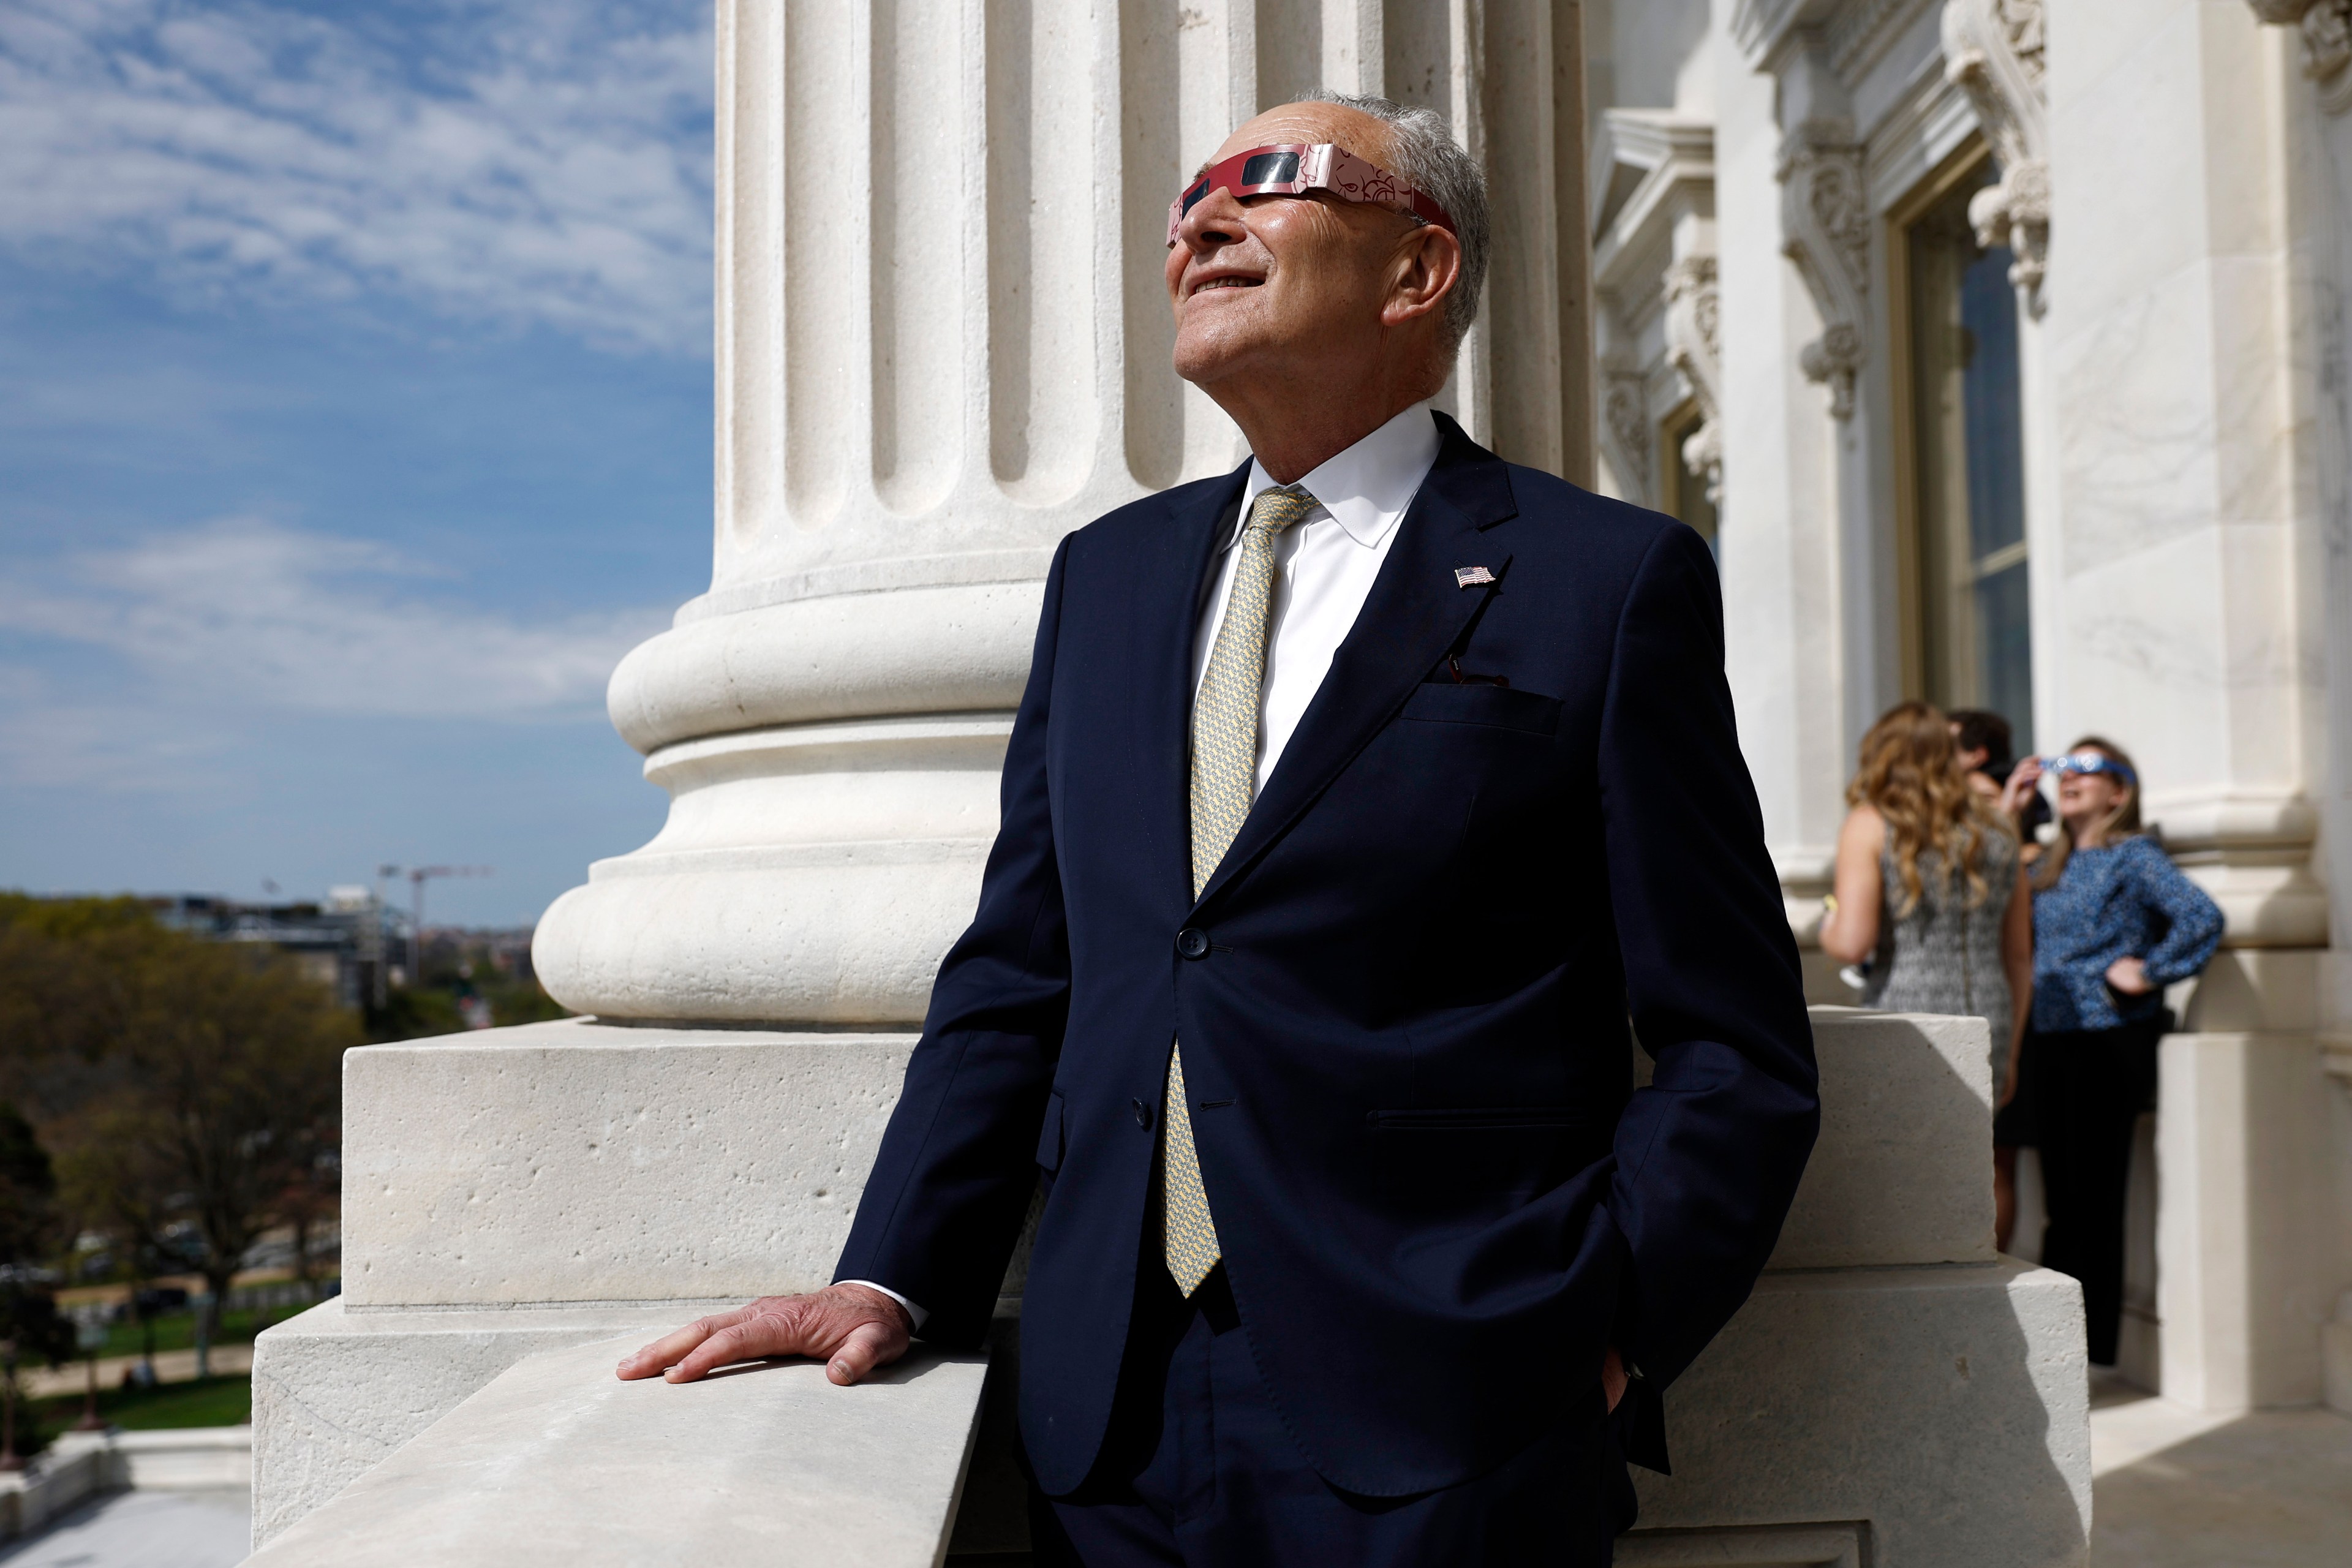 A man in a navy suit stands by a column, wearing eclipse glasses, smiling and looking up. People in background also wear similar glasses.